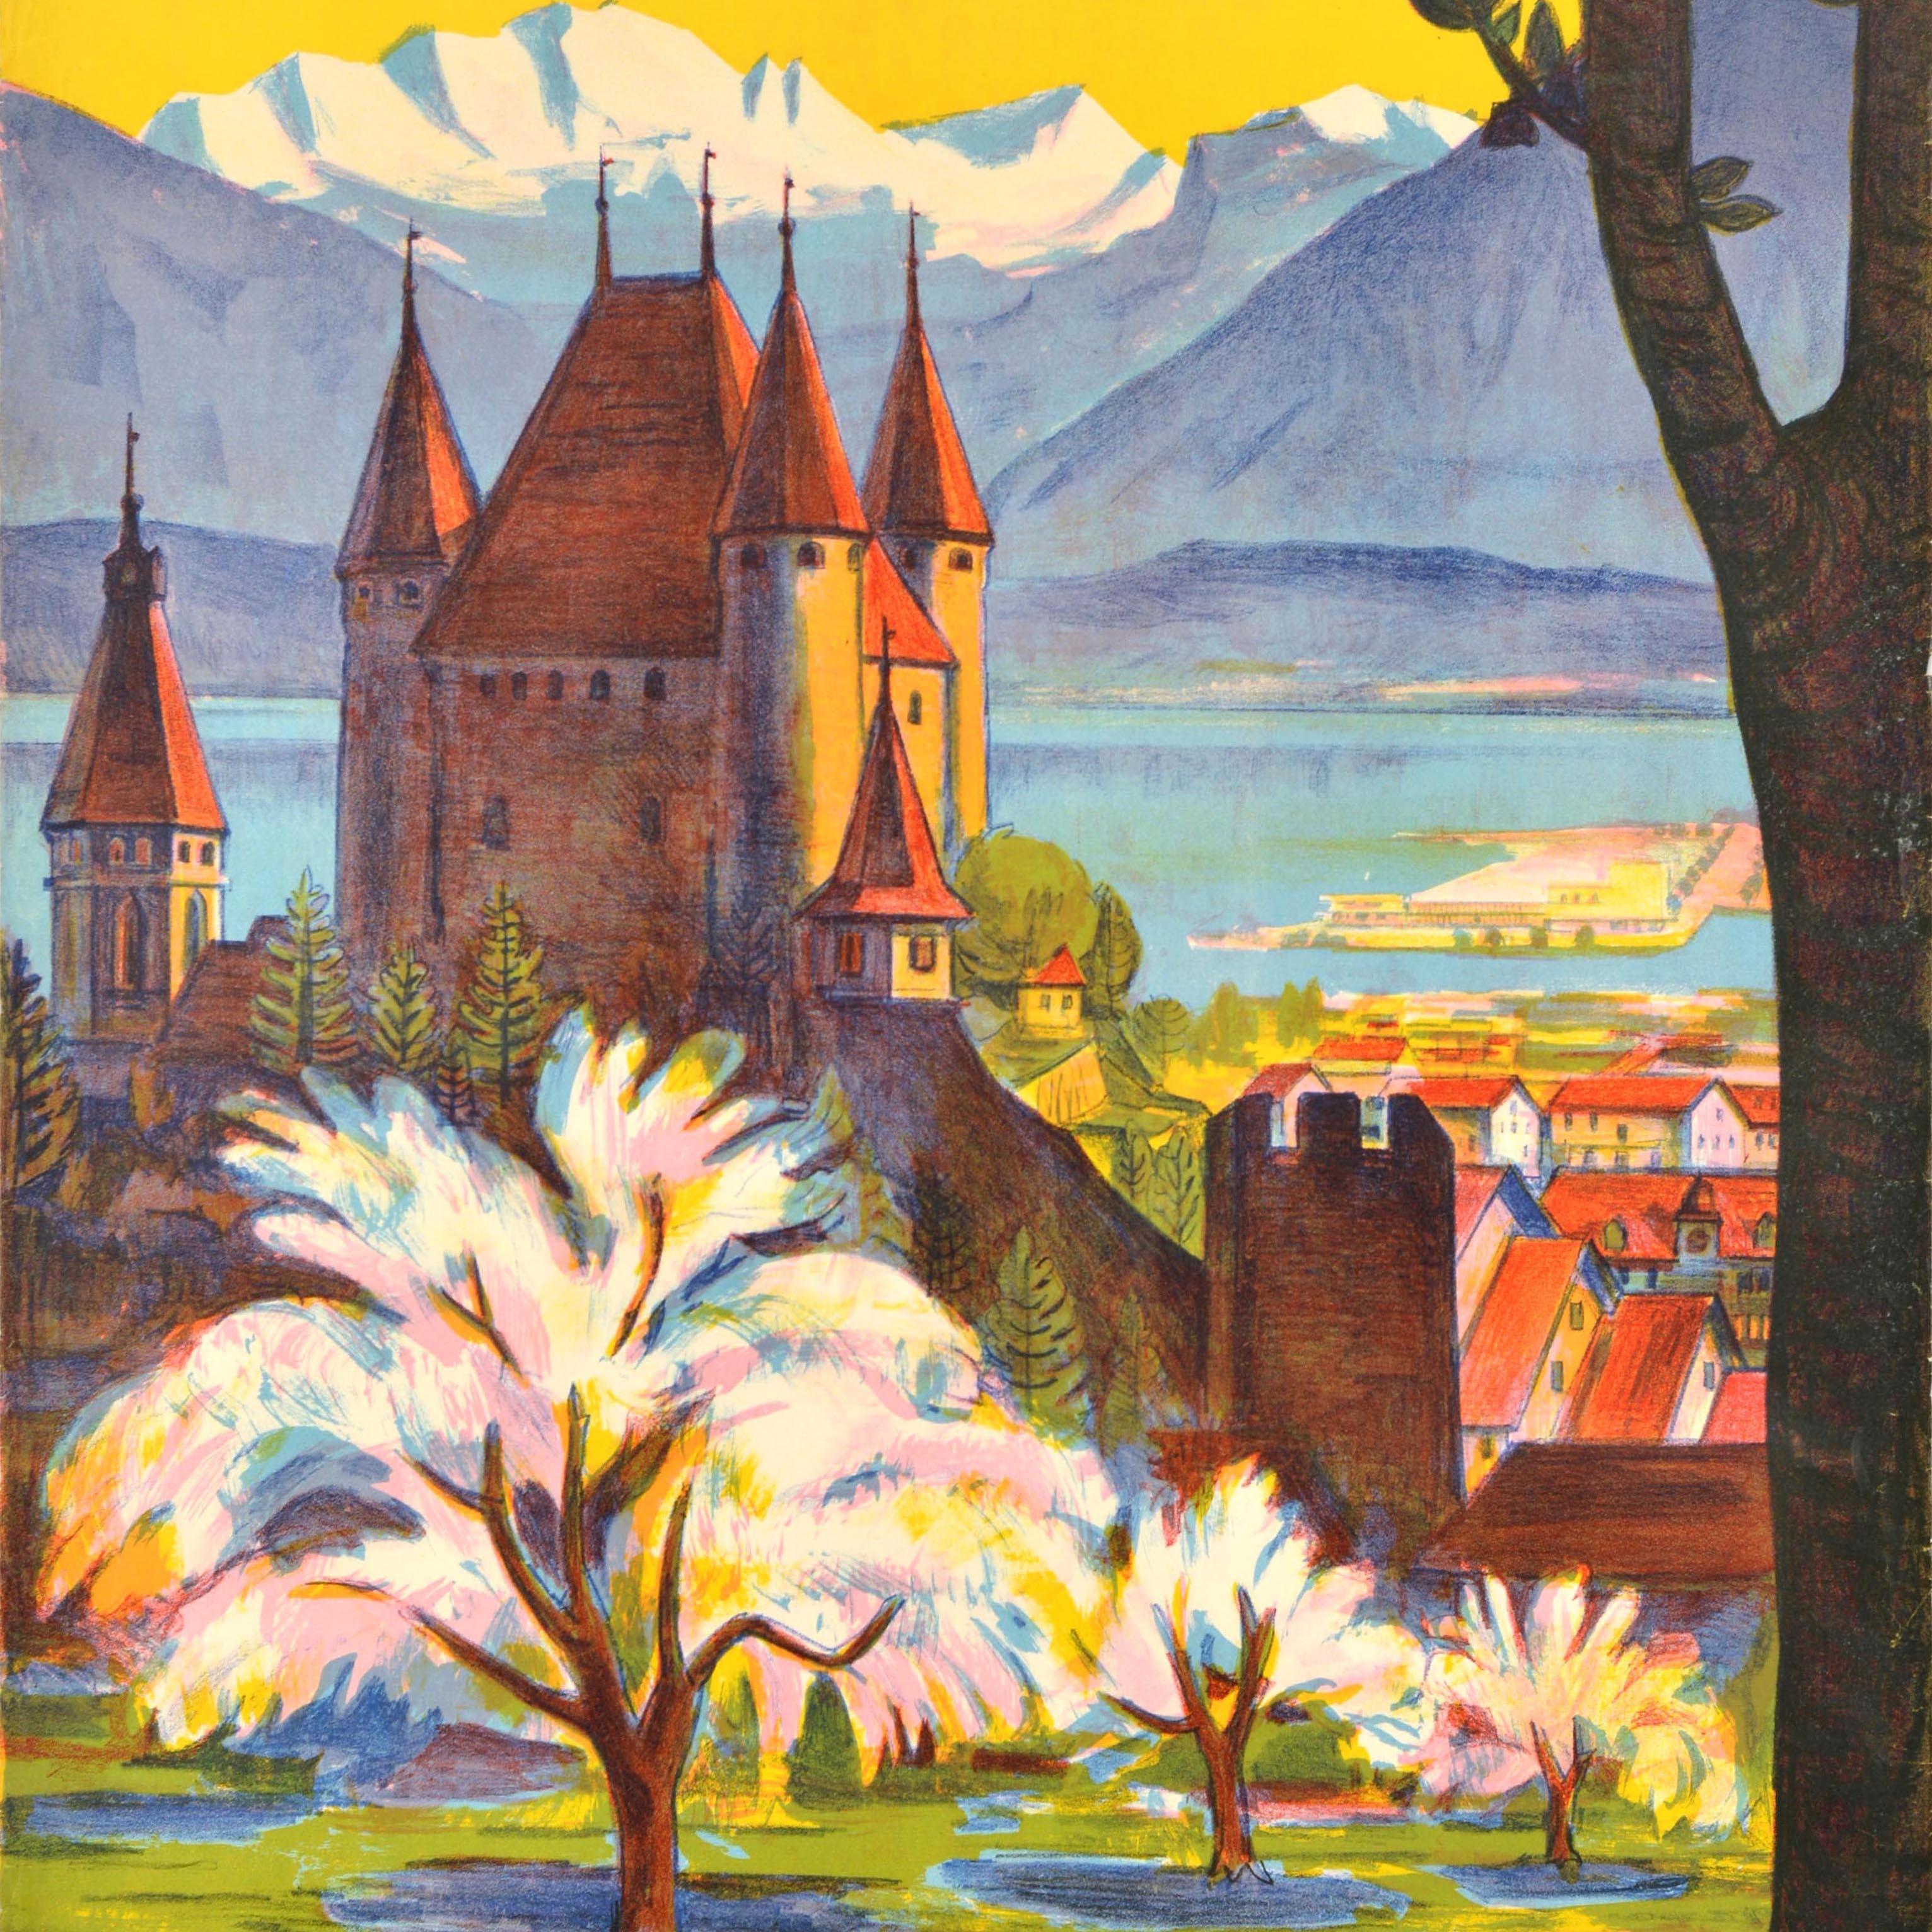 Original vintage travel poster for the historic Swiss town of Thun in the Bernese Oberland region featuring a colourful illustration depicting a scenic view of the 12th century Schloss Thun Castle with trees in the foreground and the snow topped